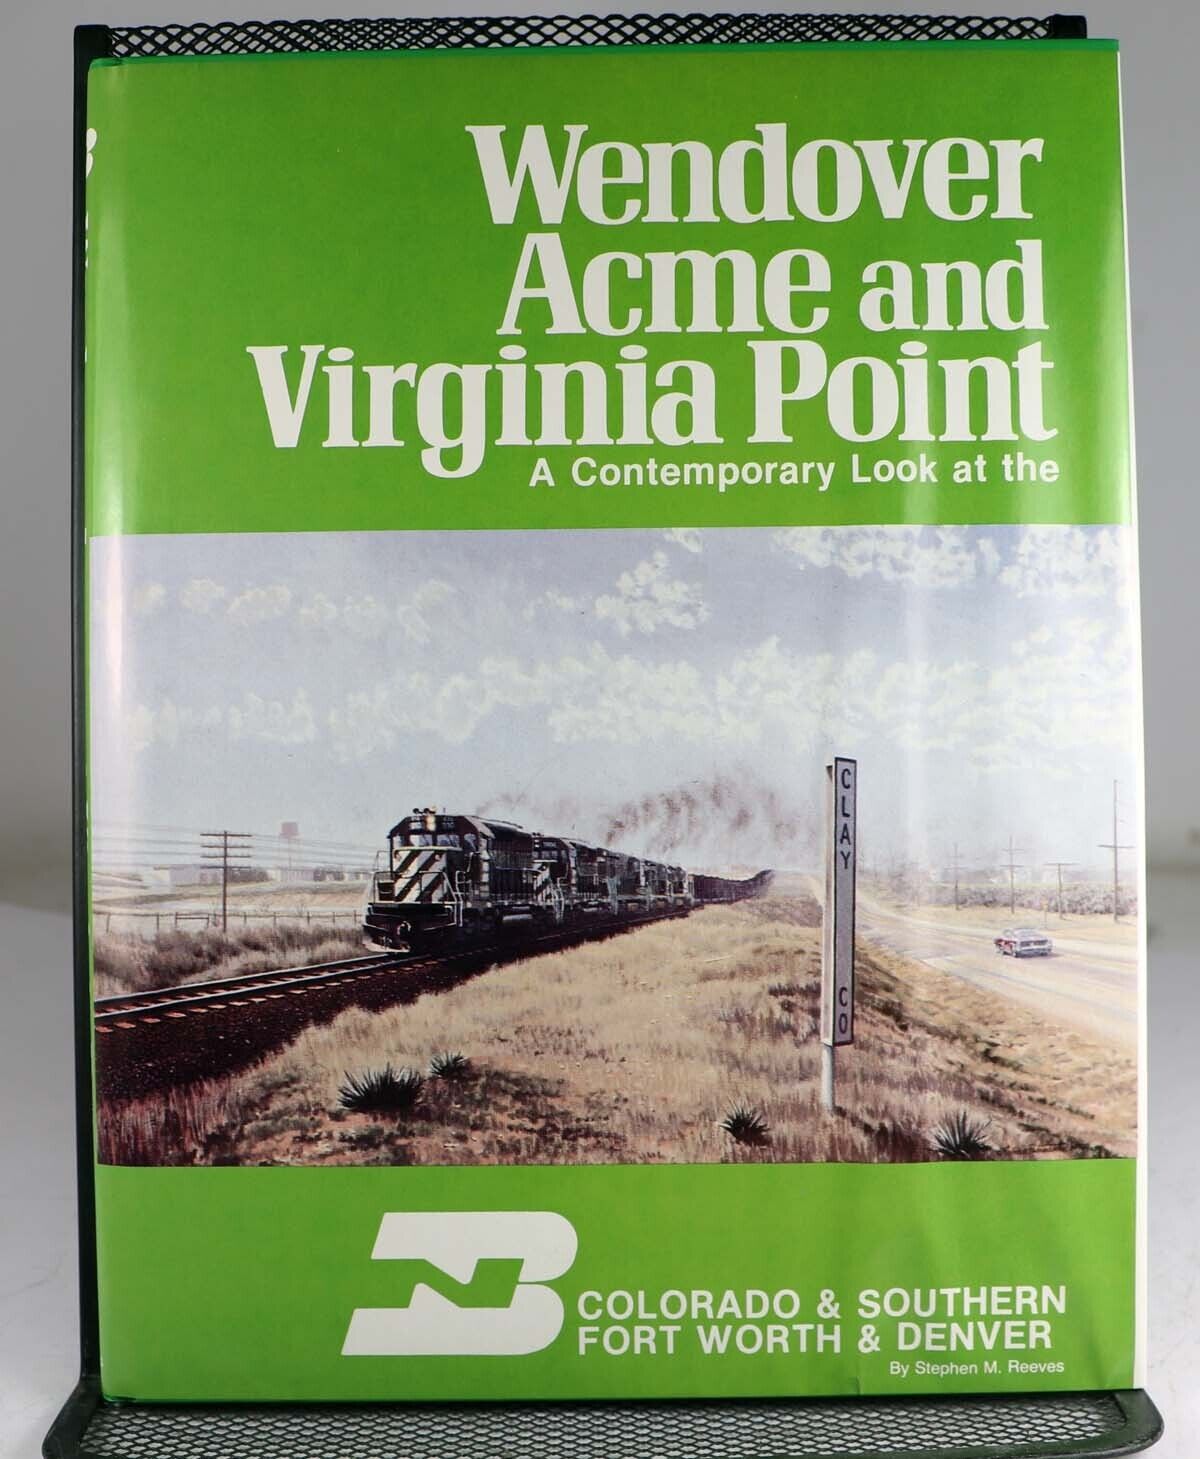 Wendover Acme & Virginia Point A Look At The C&S & FW&D RR Book By Steve Reeves